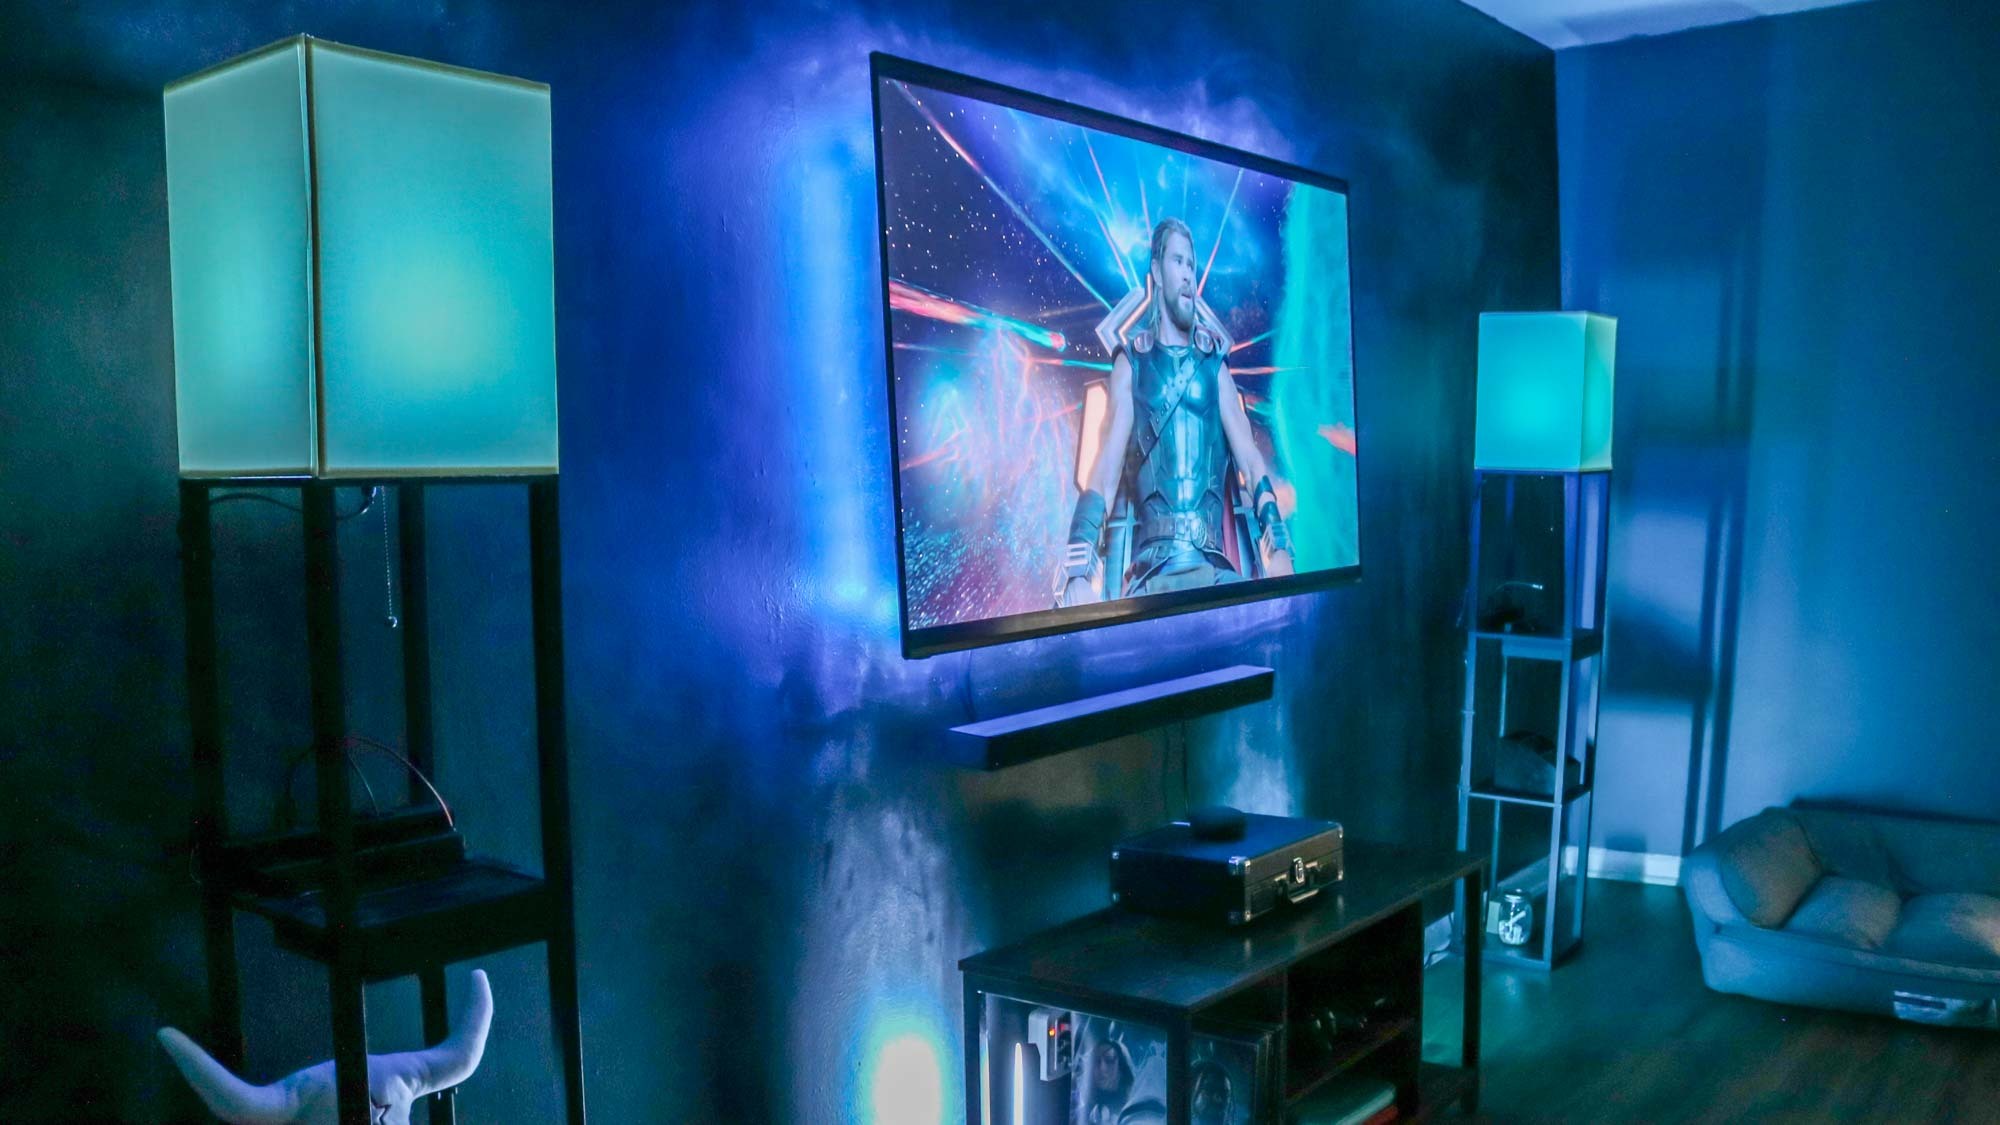 Philips Hue lights can now sync with Samsung TVs, for a price